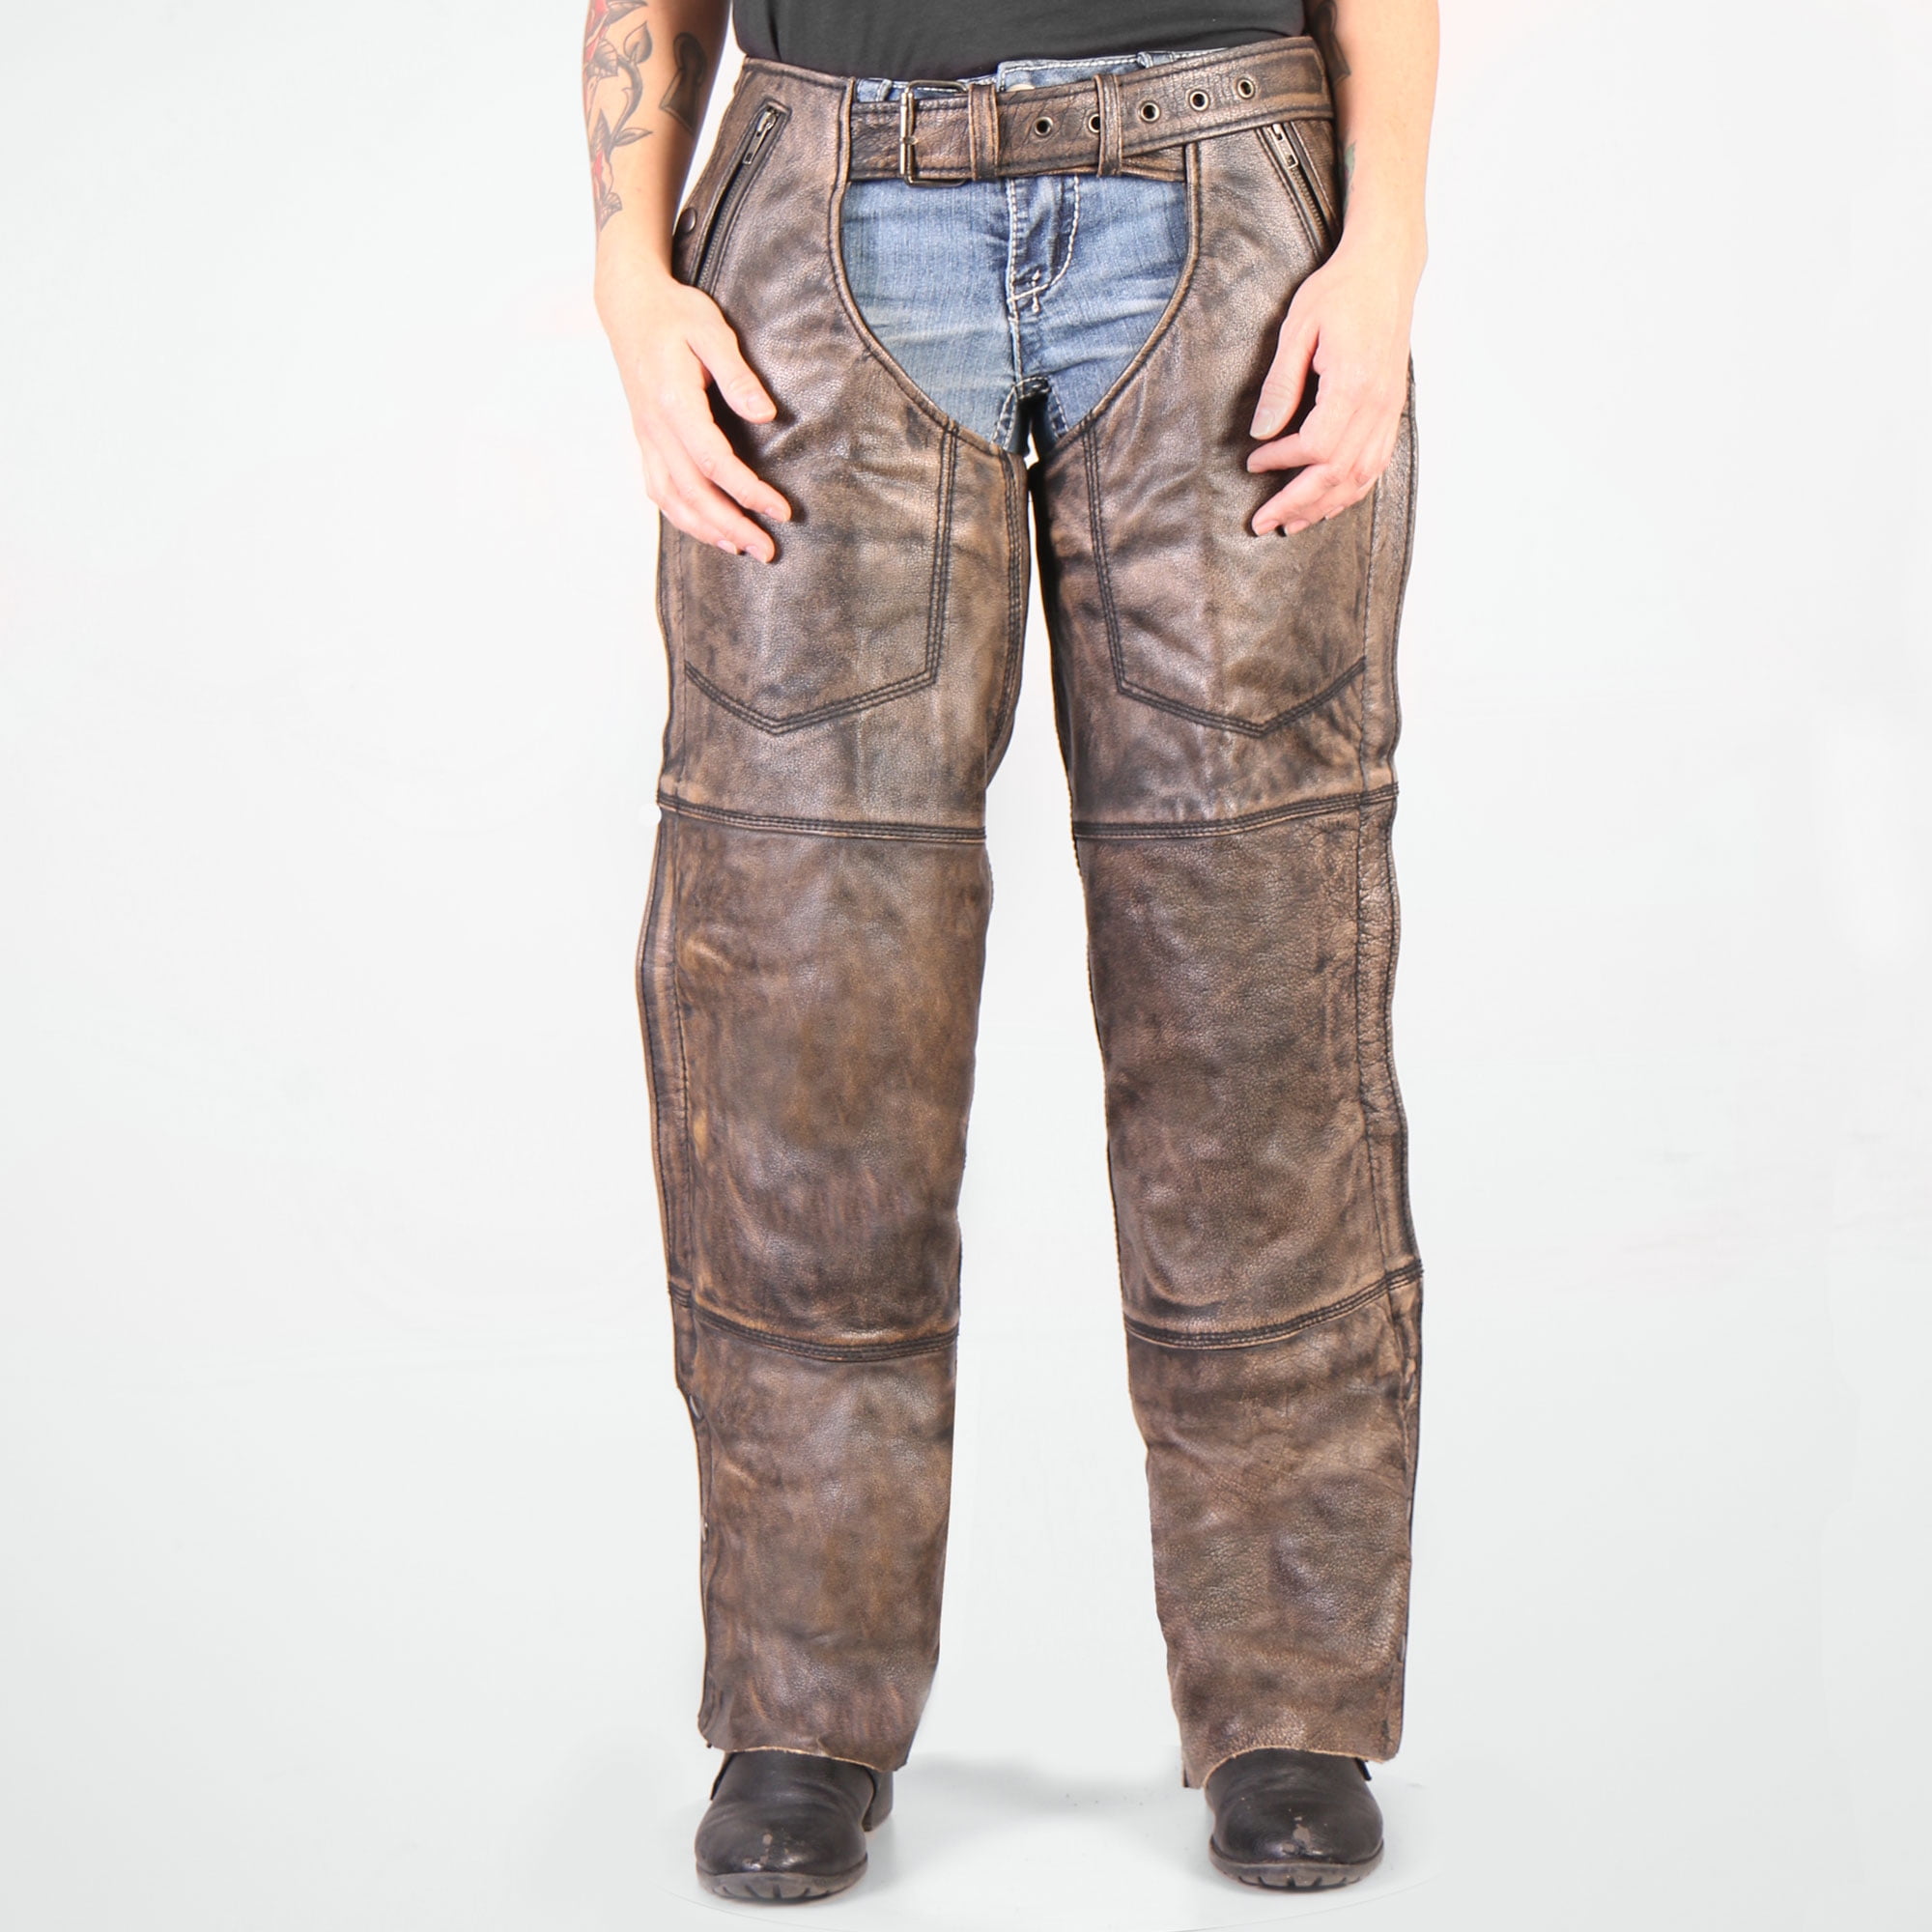 Hot Leathers CHM1008 Unisex Distressed Brown Premium Leather Chaps 